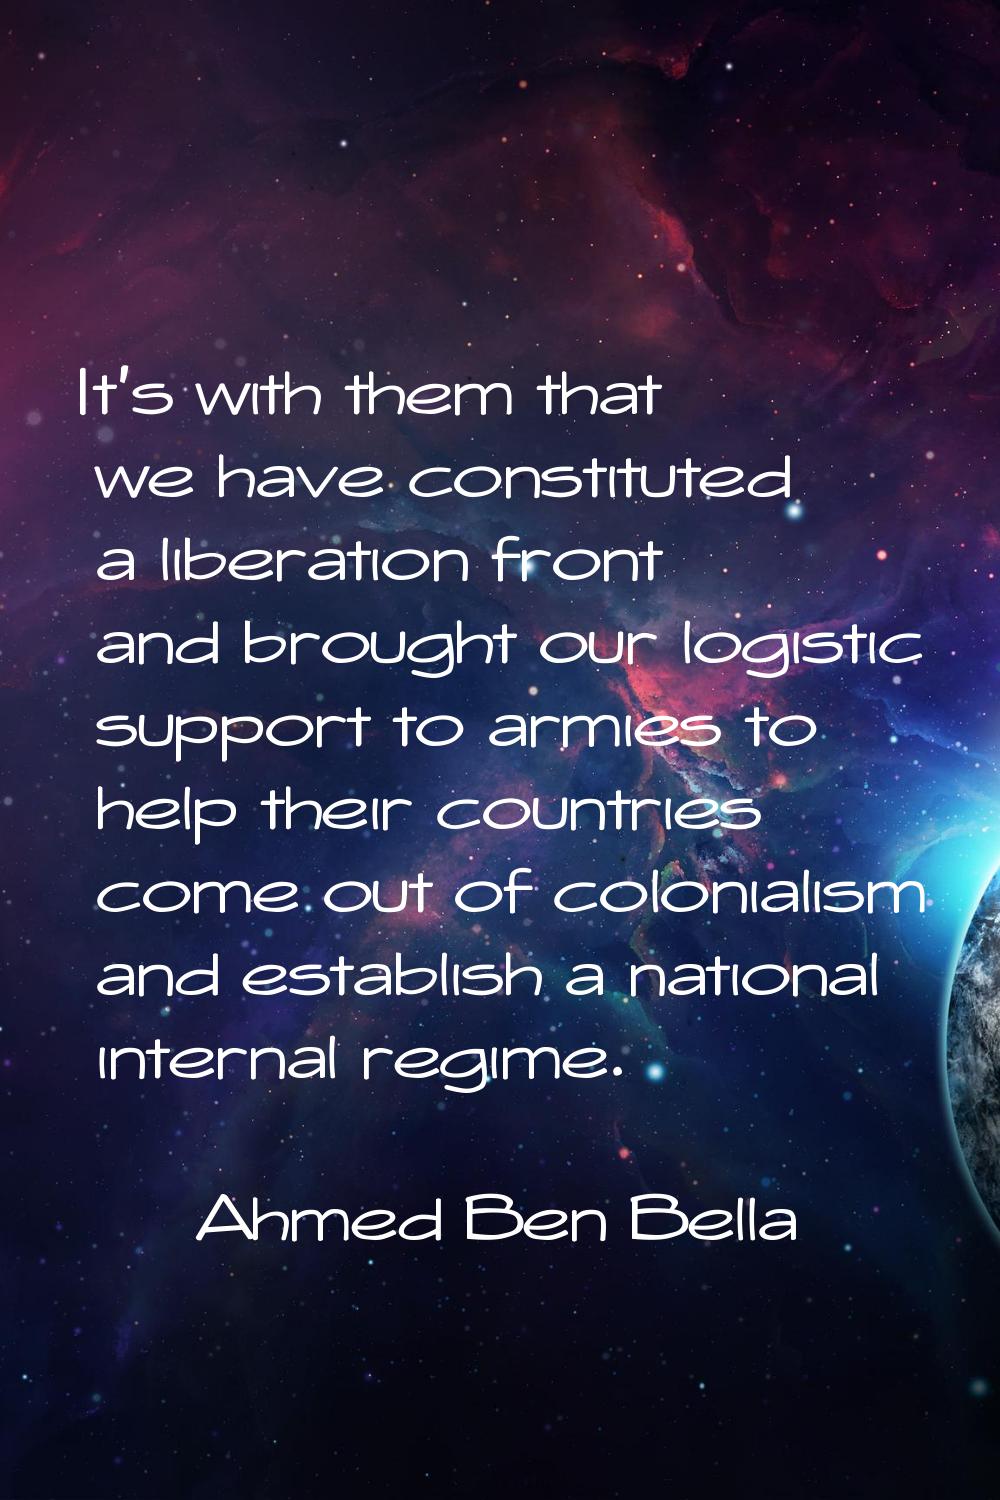 It's with them that we have constituted a liberation front and brought our logistic support to armi